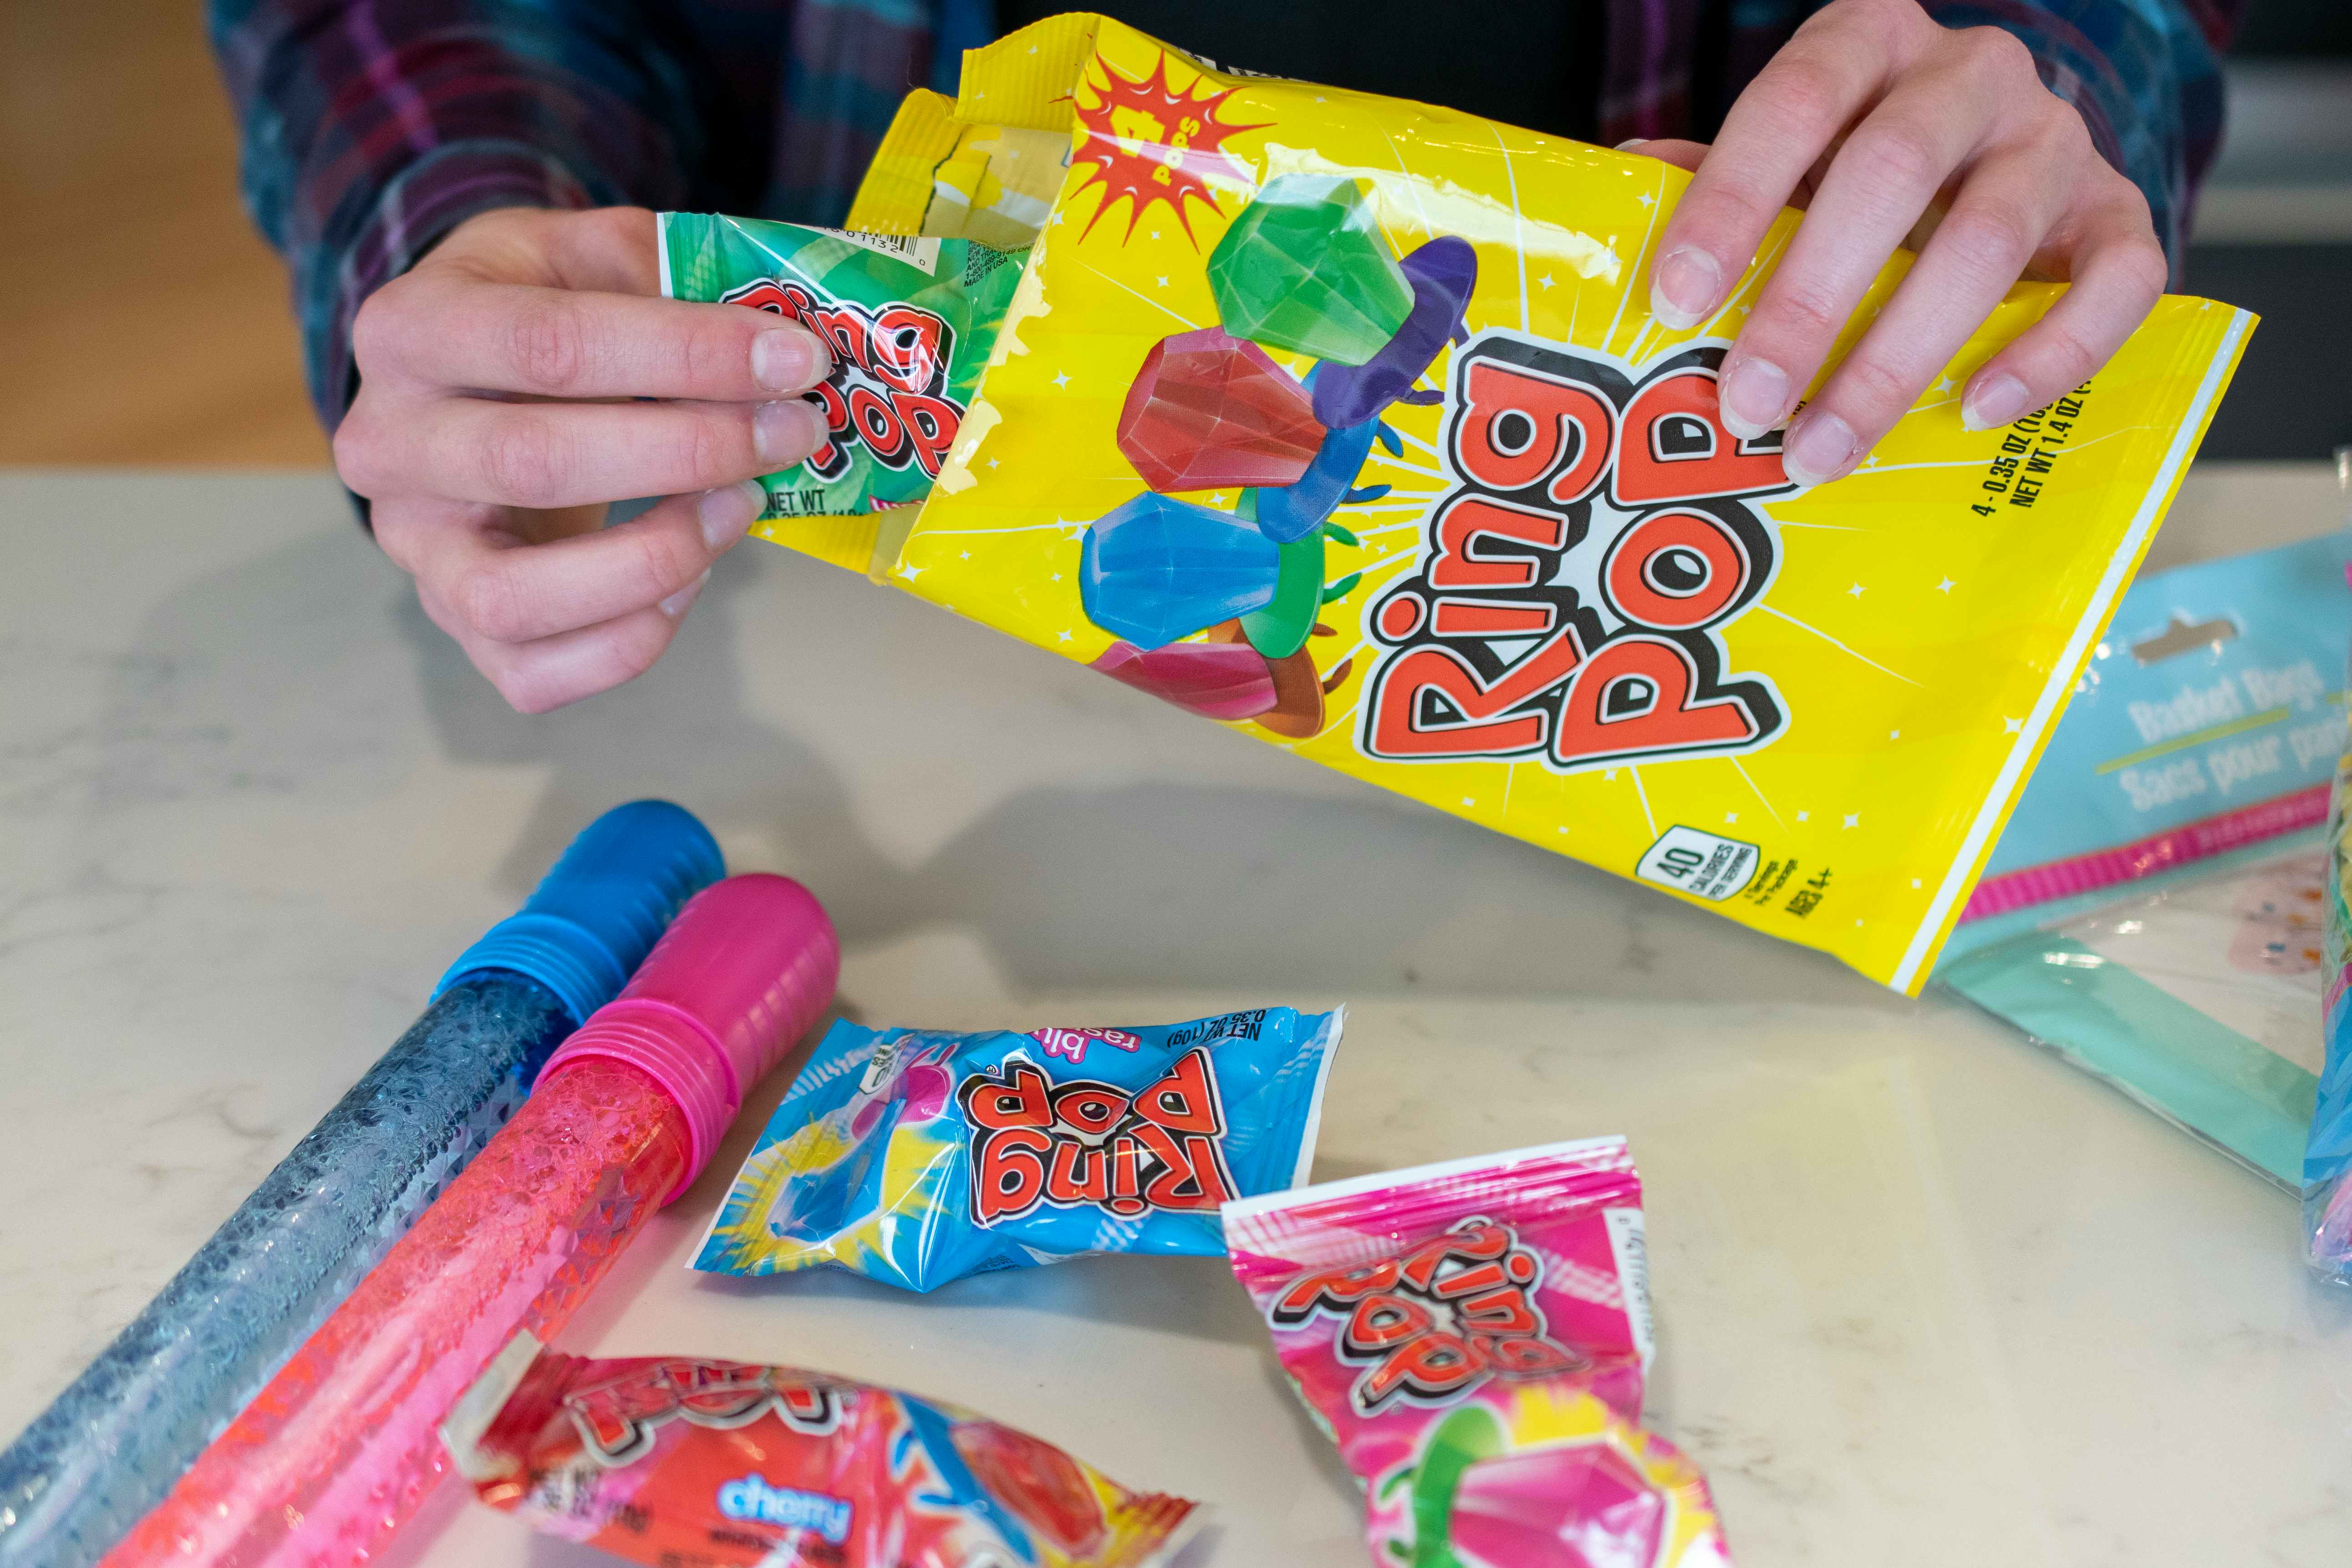 A person pulling a ring pop out of the packaging with three others on the table next to two bubble wands